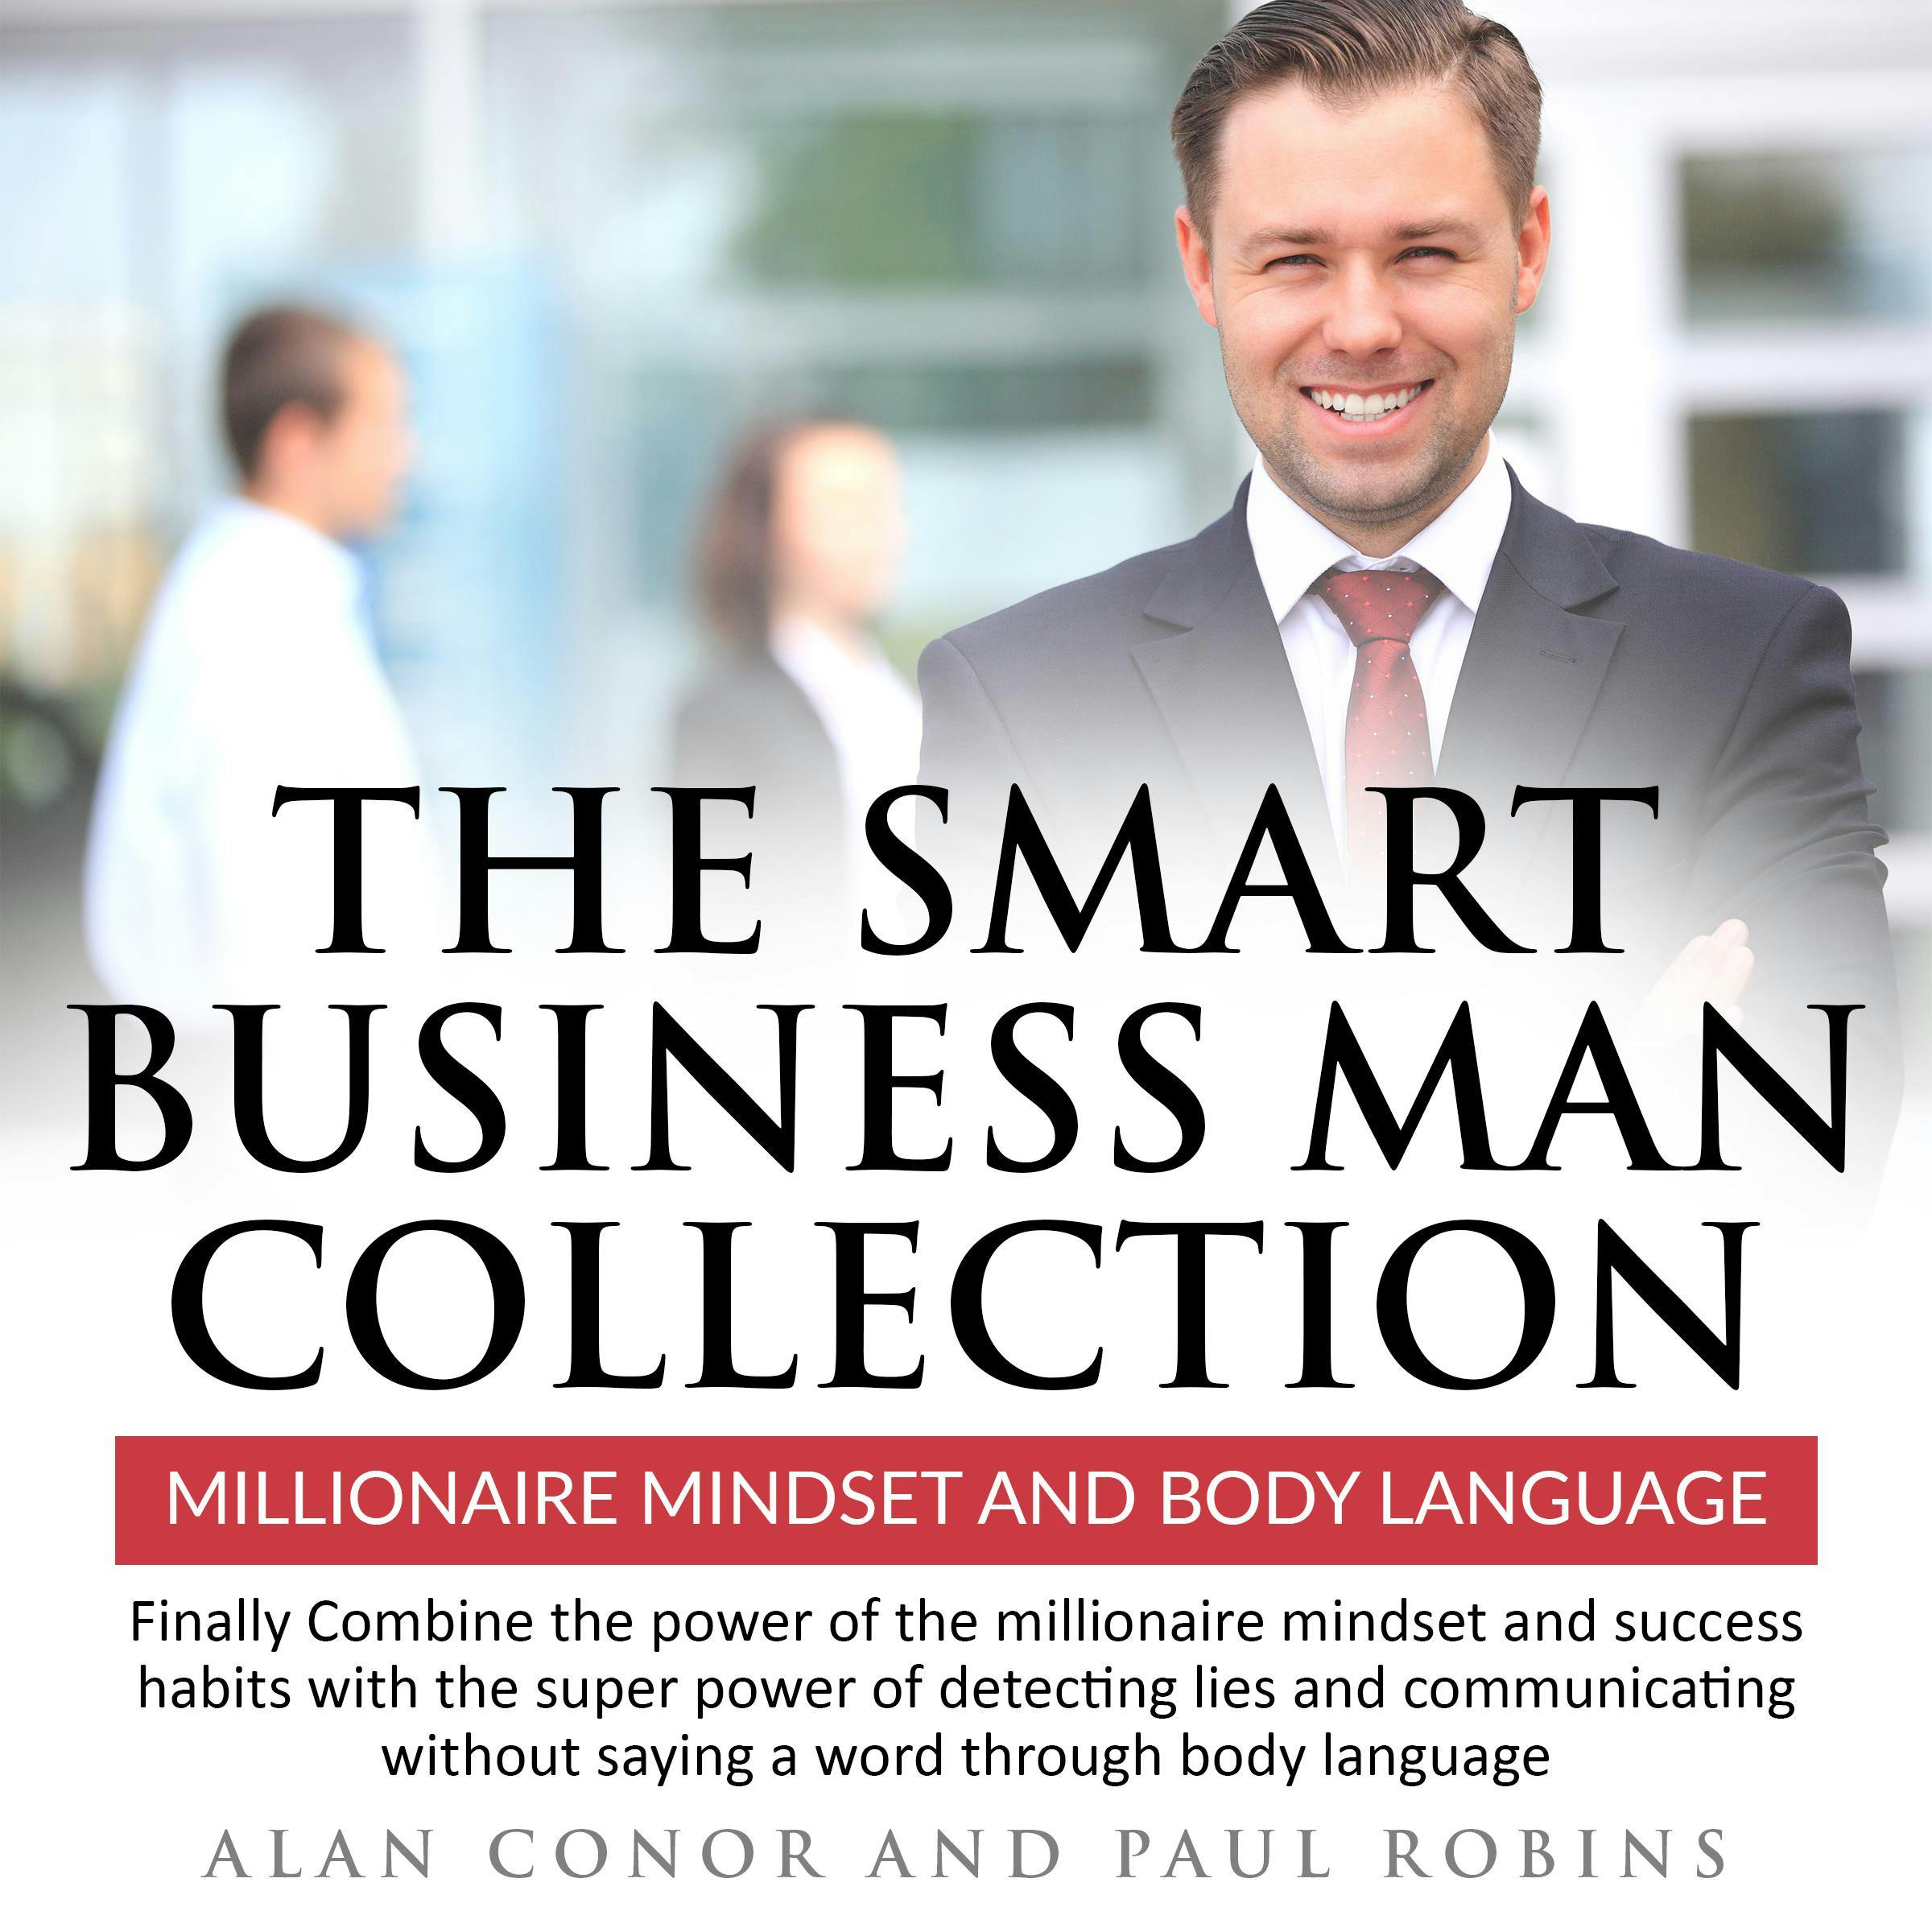 The Smart business man collection: Millionaire Mindset and Body language: Finally Combine the power of the millionaire mindset and success habits with the super power of detecting lies and communicating without saying a word through body language. - Paul Robins, Alan Conor